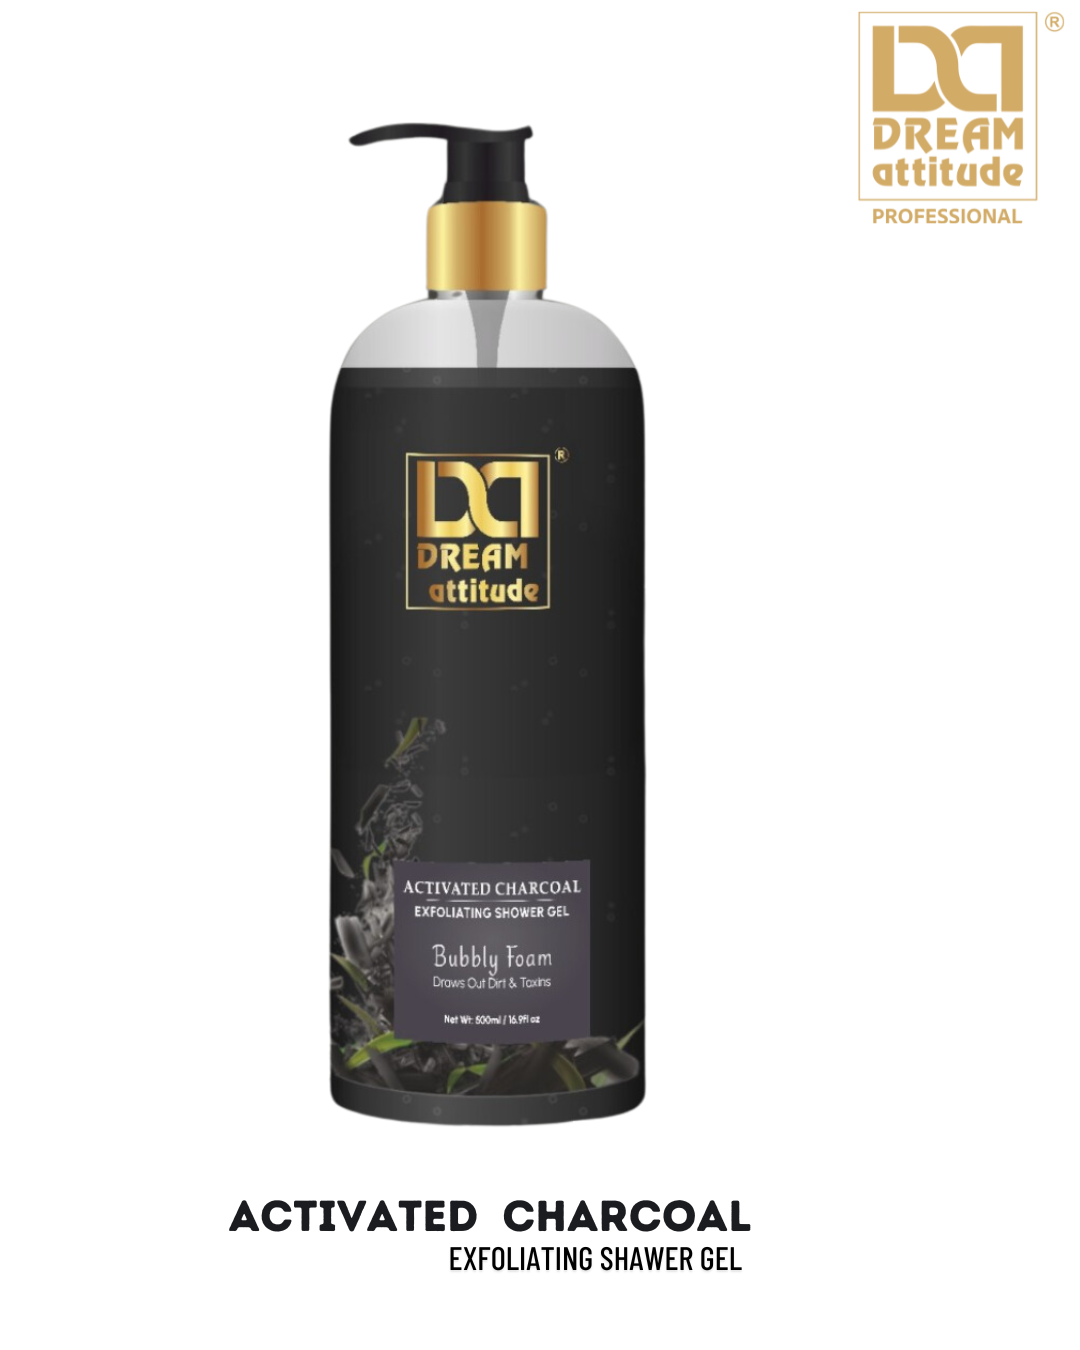 Activated Charcoal Exfoliating Shower Gel (500ml)